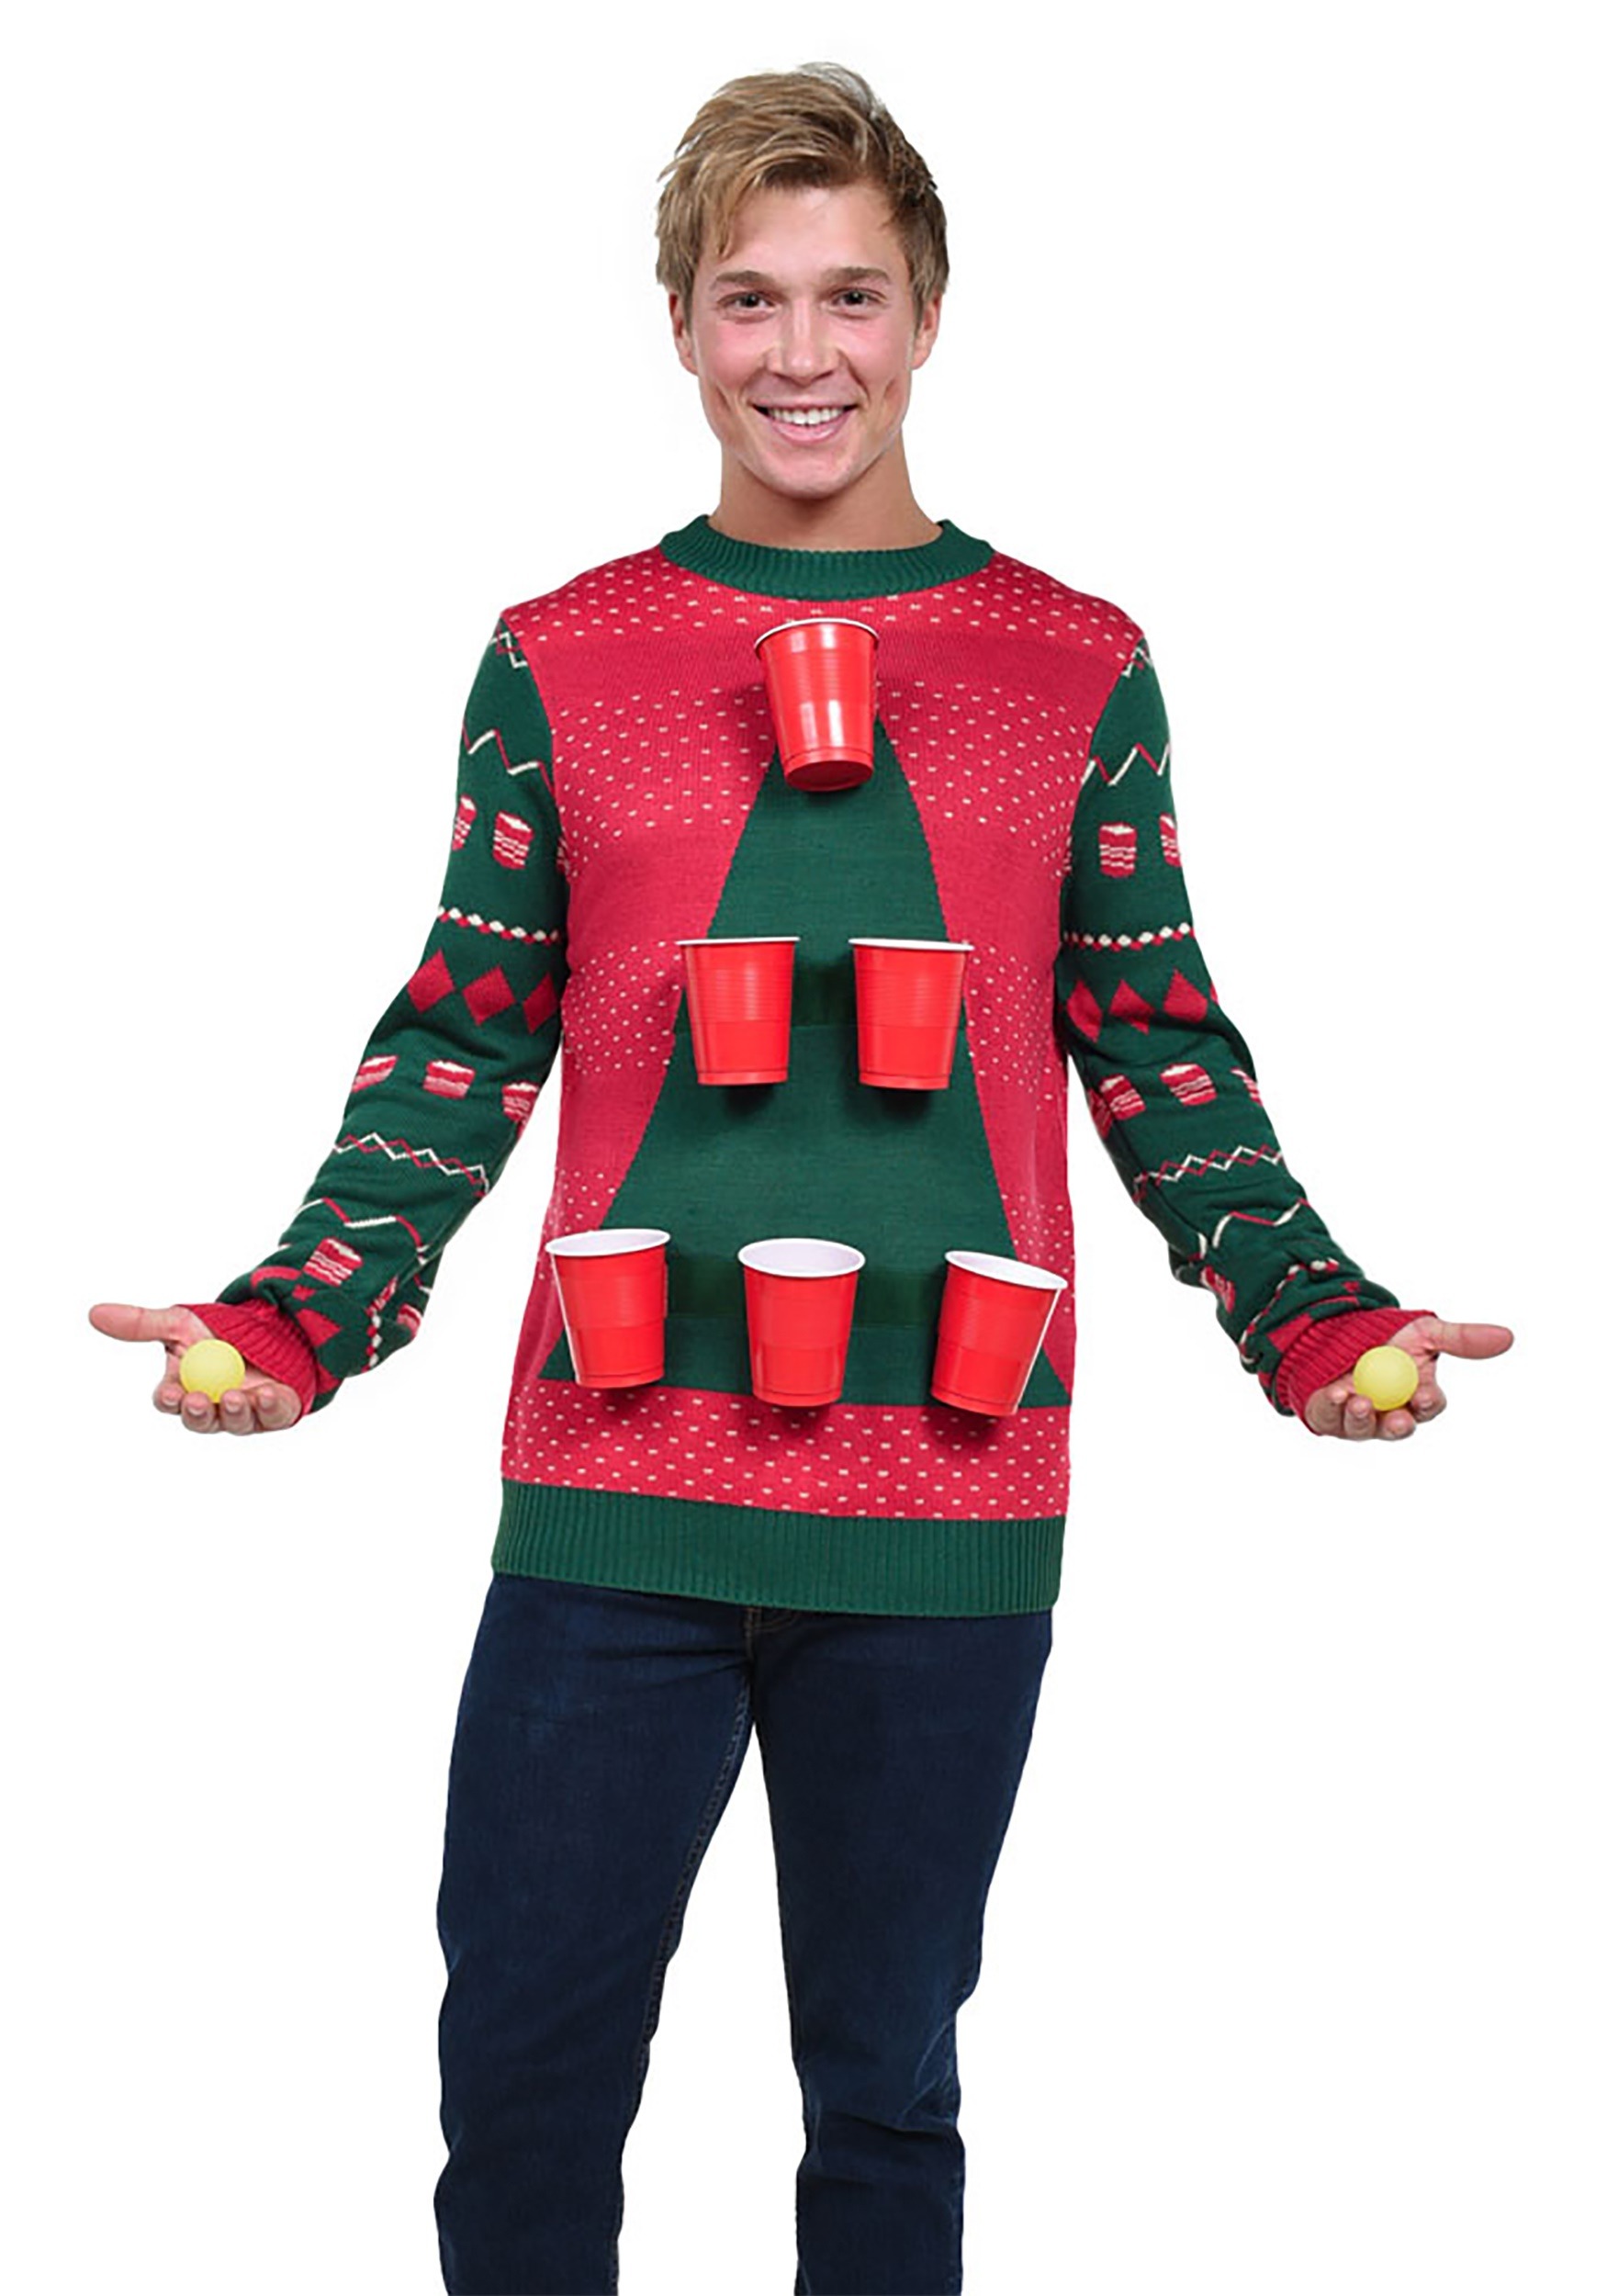 Men's Beer Pong Tipsy Elves Ugly Christmas Sweater